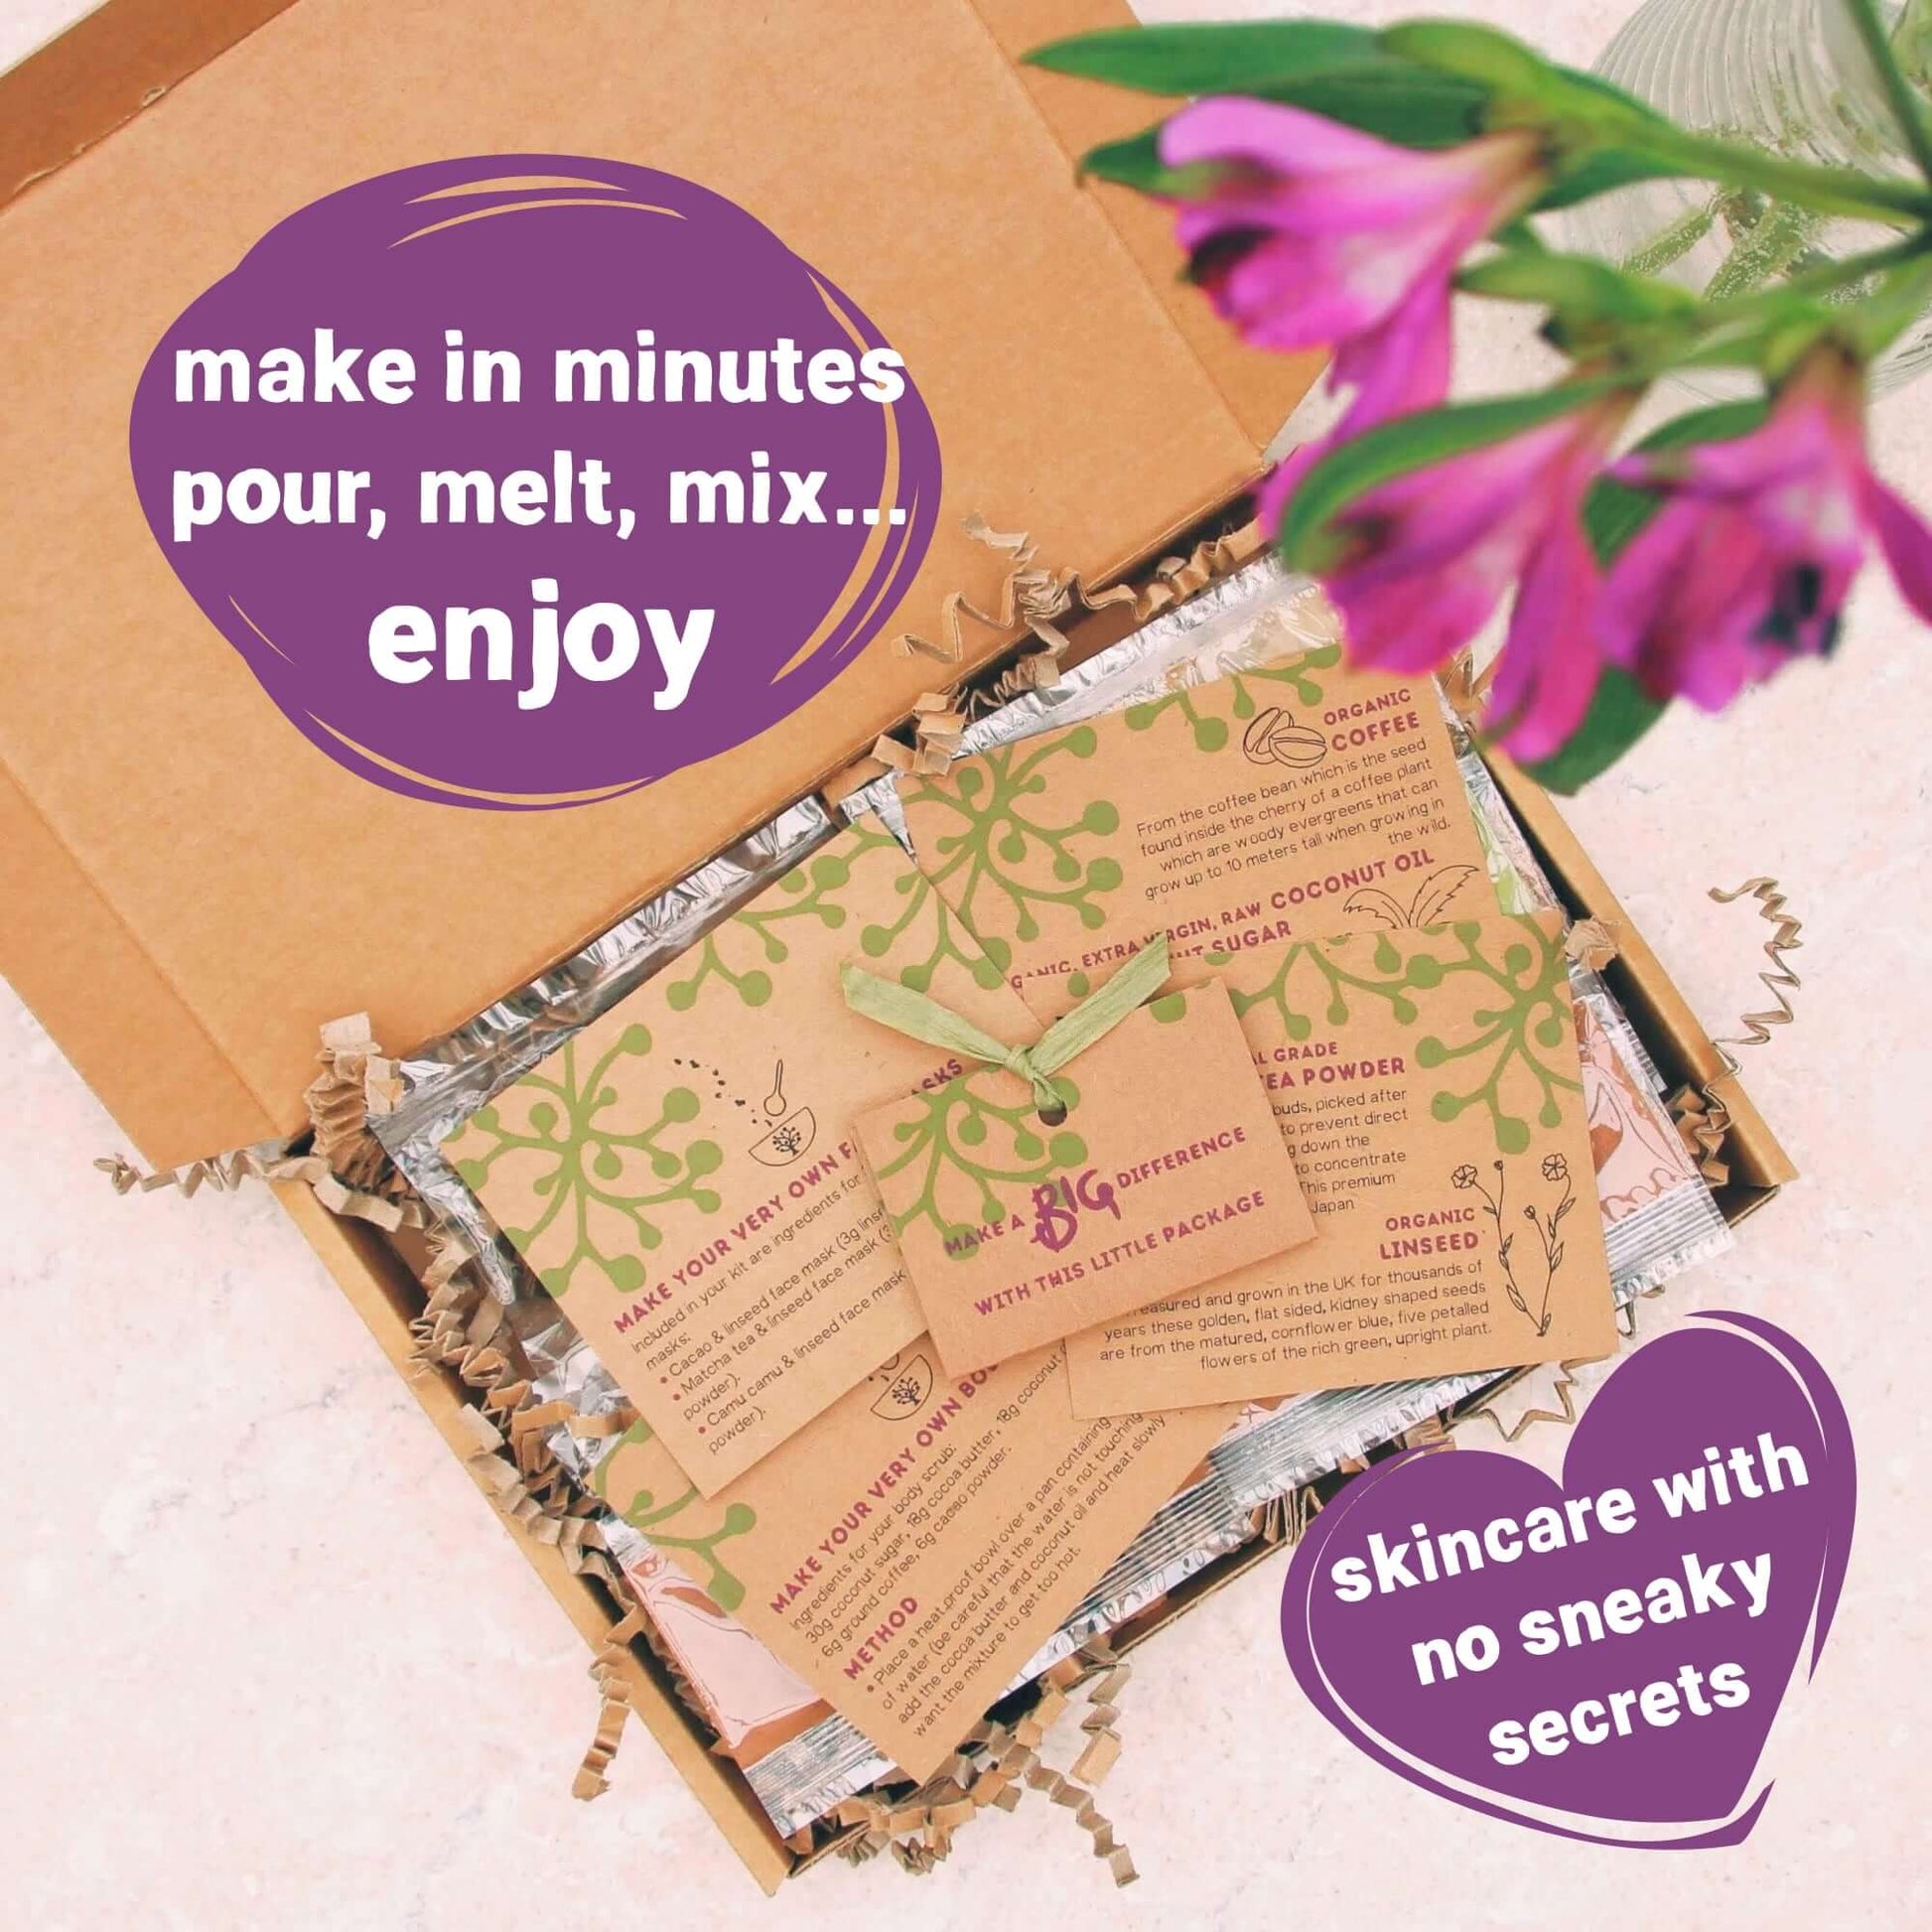 sending love letterbox gift so you can make skincare with no sneaky secrets